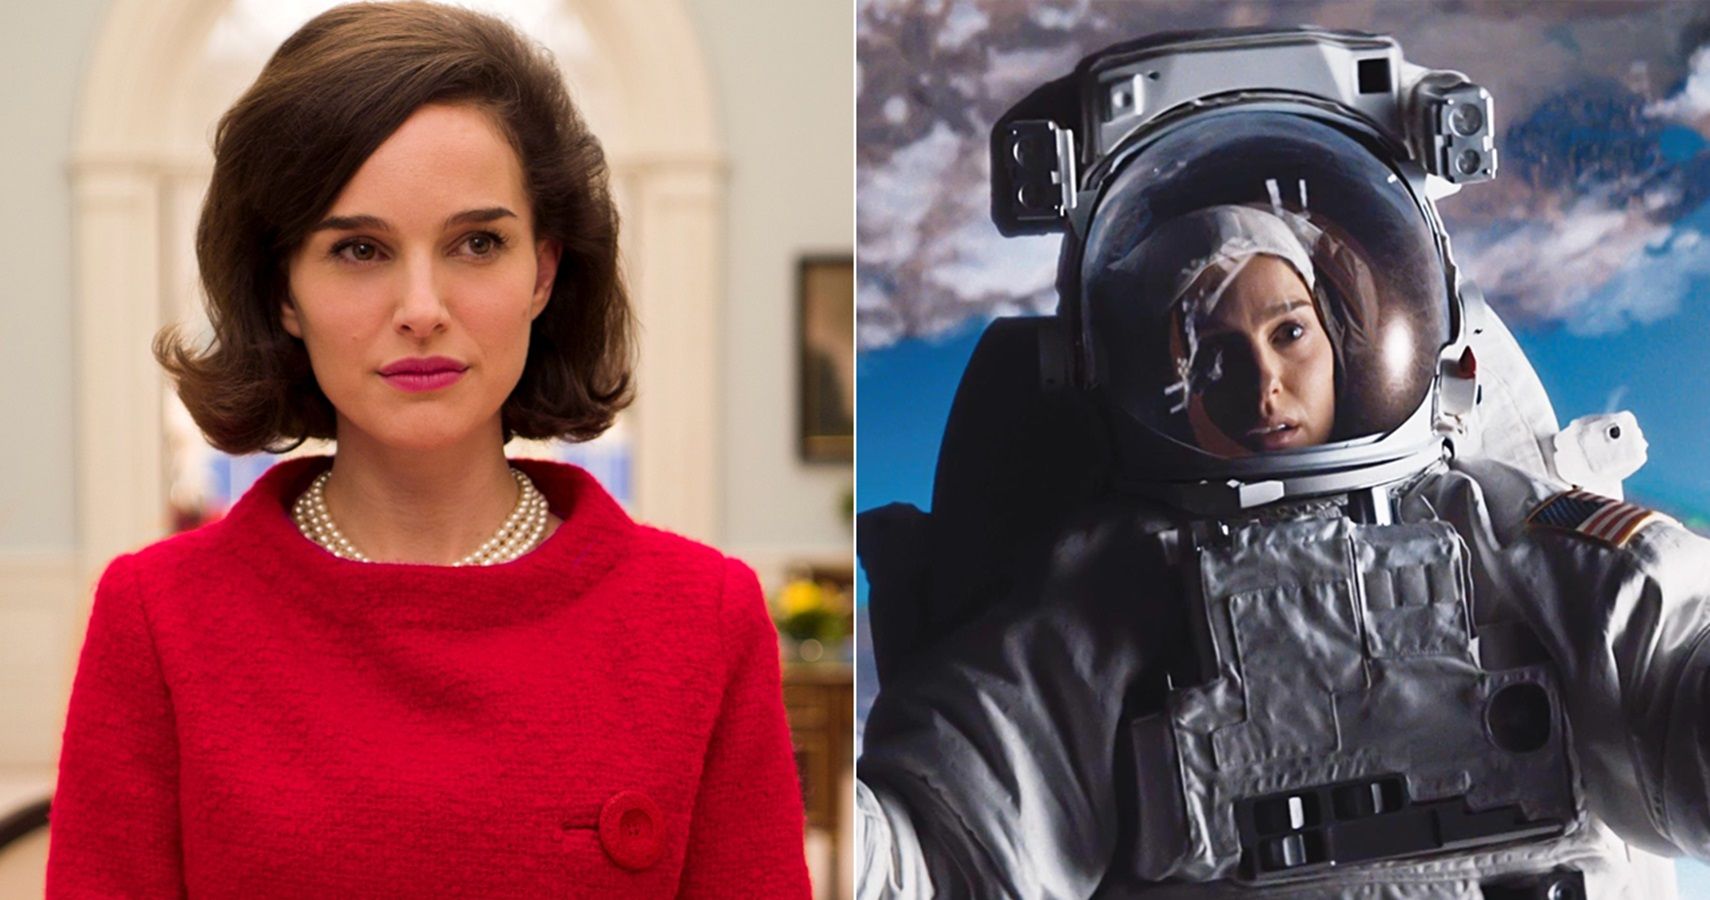 Natalie Portman Her 5 Most Iconic Roles (& 5 Movies That Wasted Her Tal...